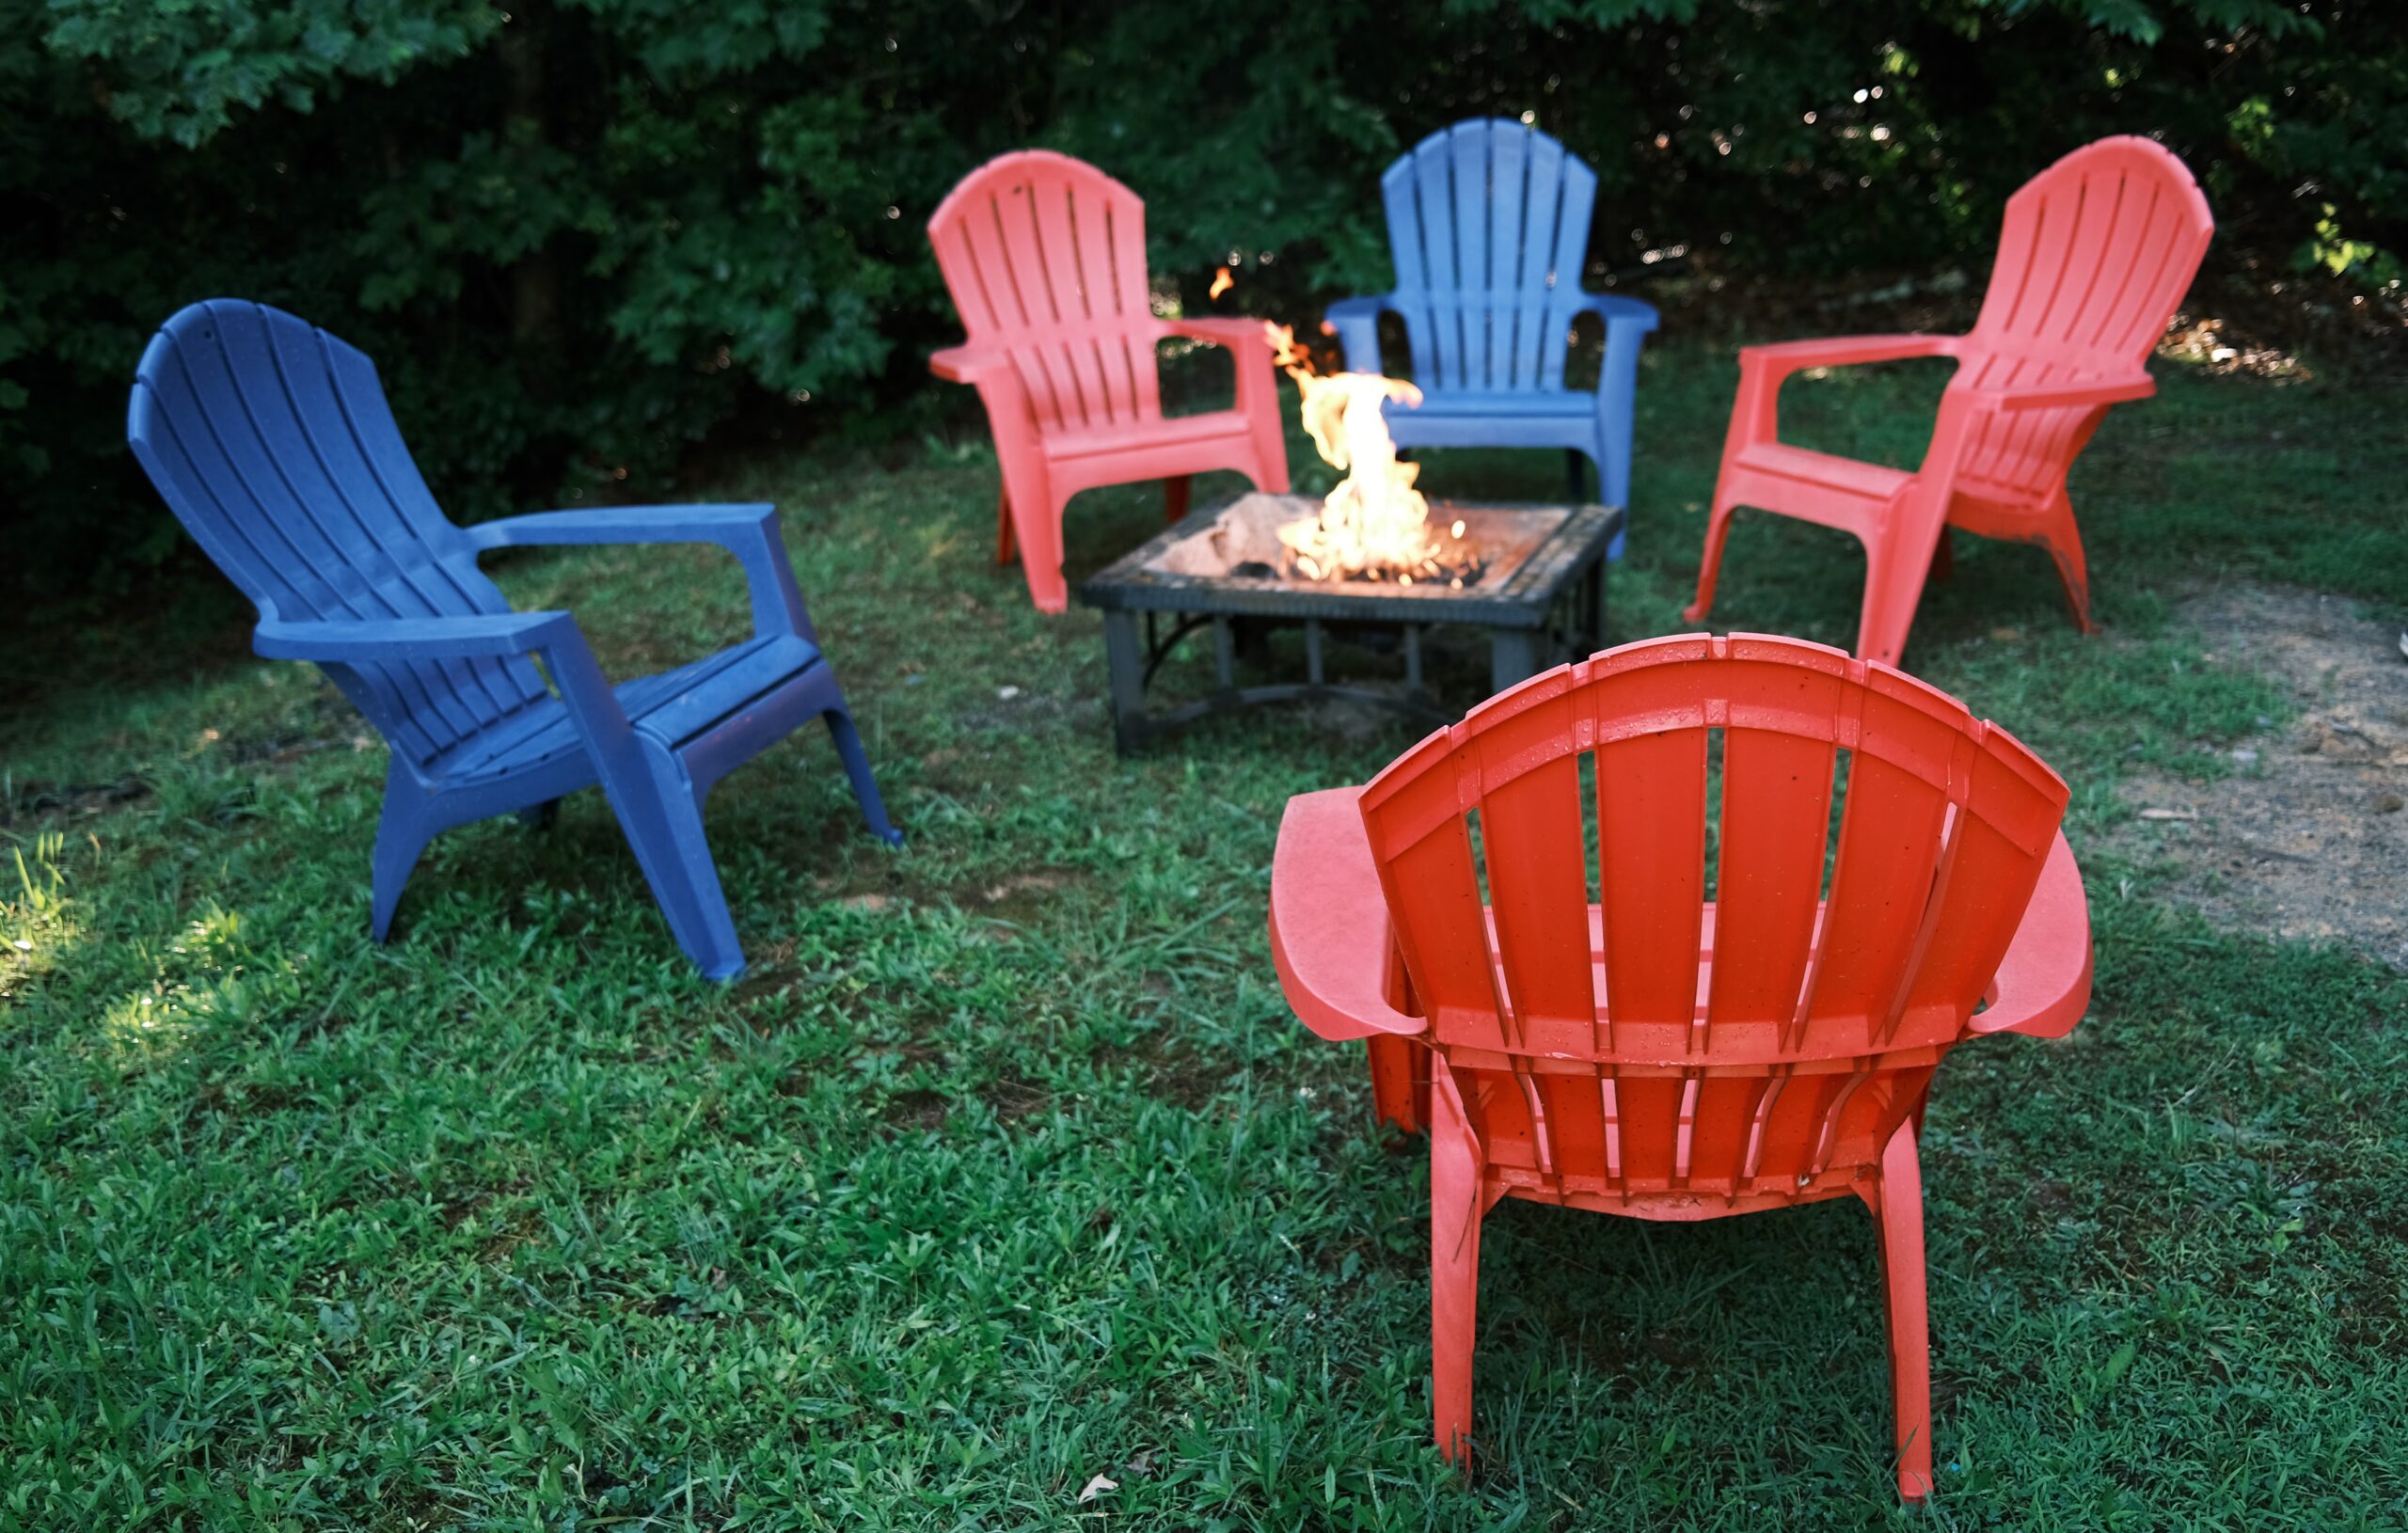 Gather around the fire for some cozy conversation. This fire pit table makes a great backyard fire pit idea. Pictured: Chairs around a table fire pit.